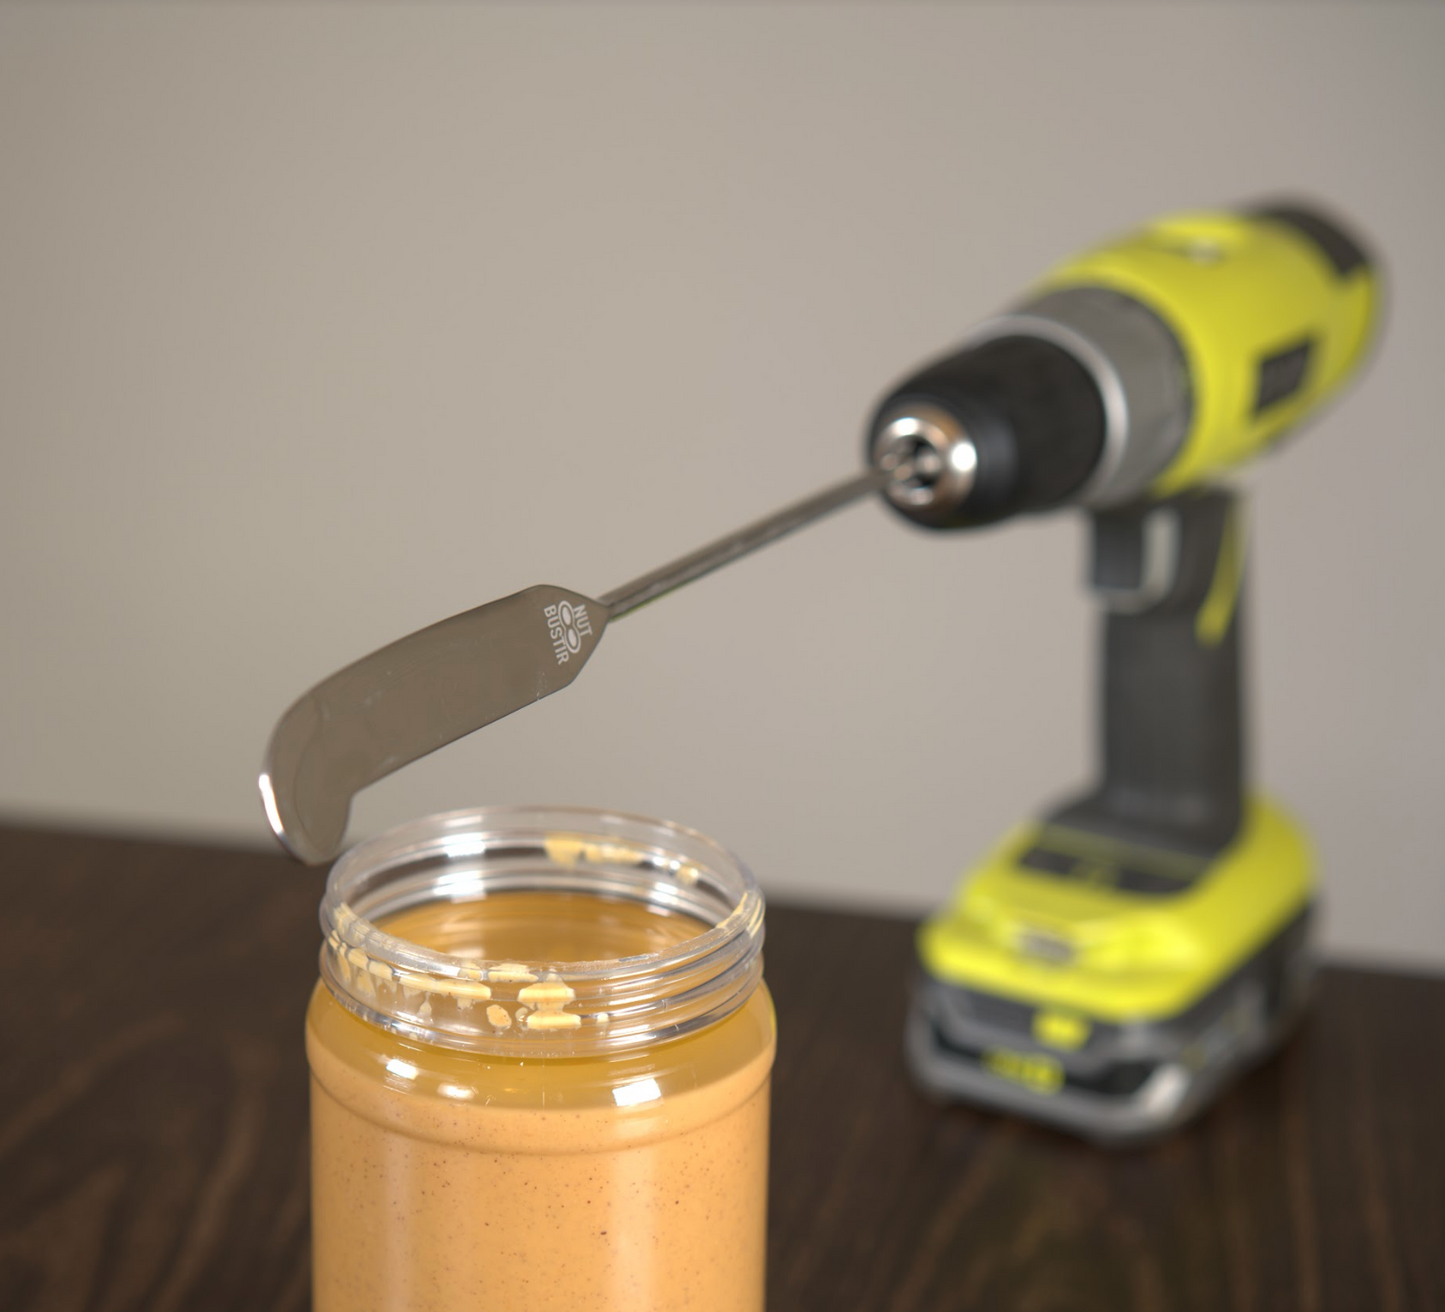 NutBustir natural nut butter mixer attaches to drills and hand mixers